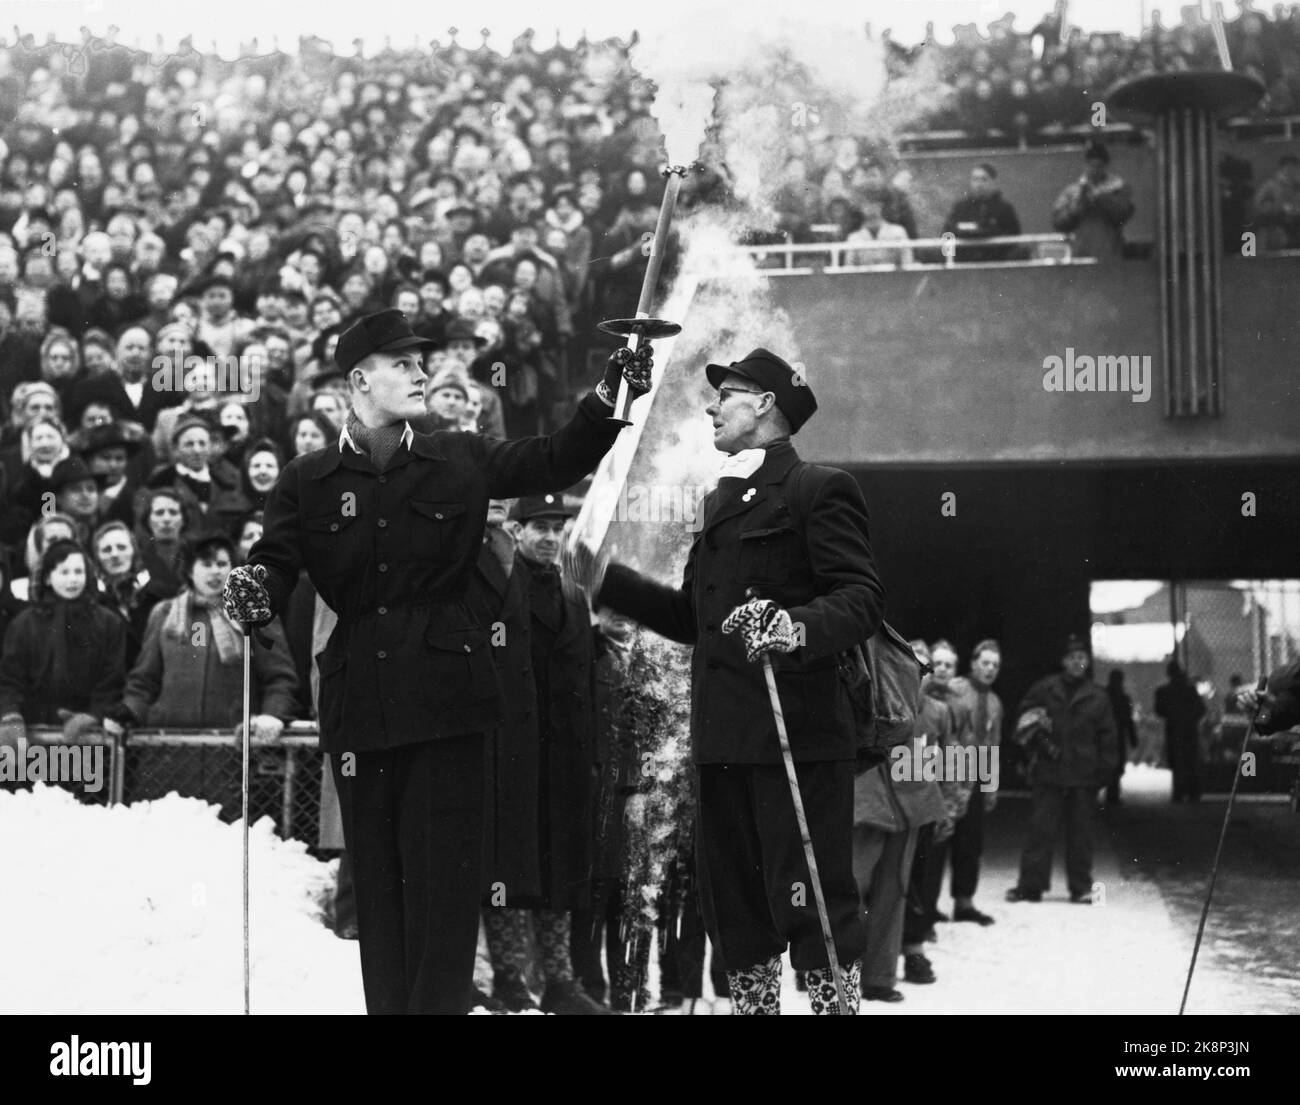 Oslo 19520215 The Olympic Winter Games in Oslo: The old disc veteran Lauritz Bergendahl delivers the Olympia torch to Eigil Nansen at the opening ceremony at Bislett Stadion Olympics 1952. Photo: NTB / NTB Stock Photo